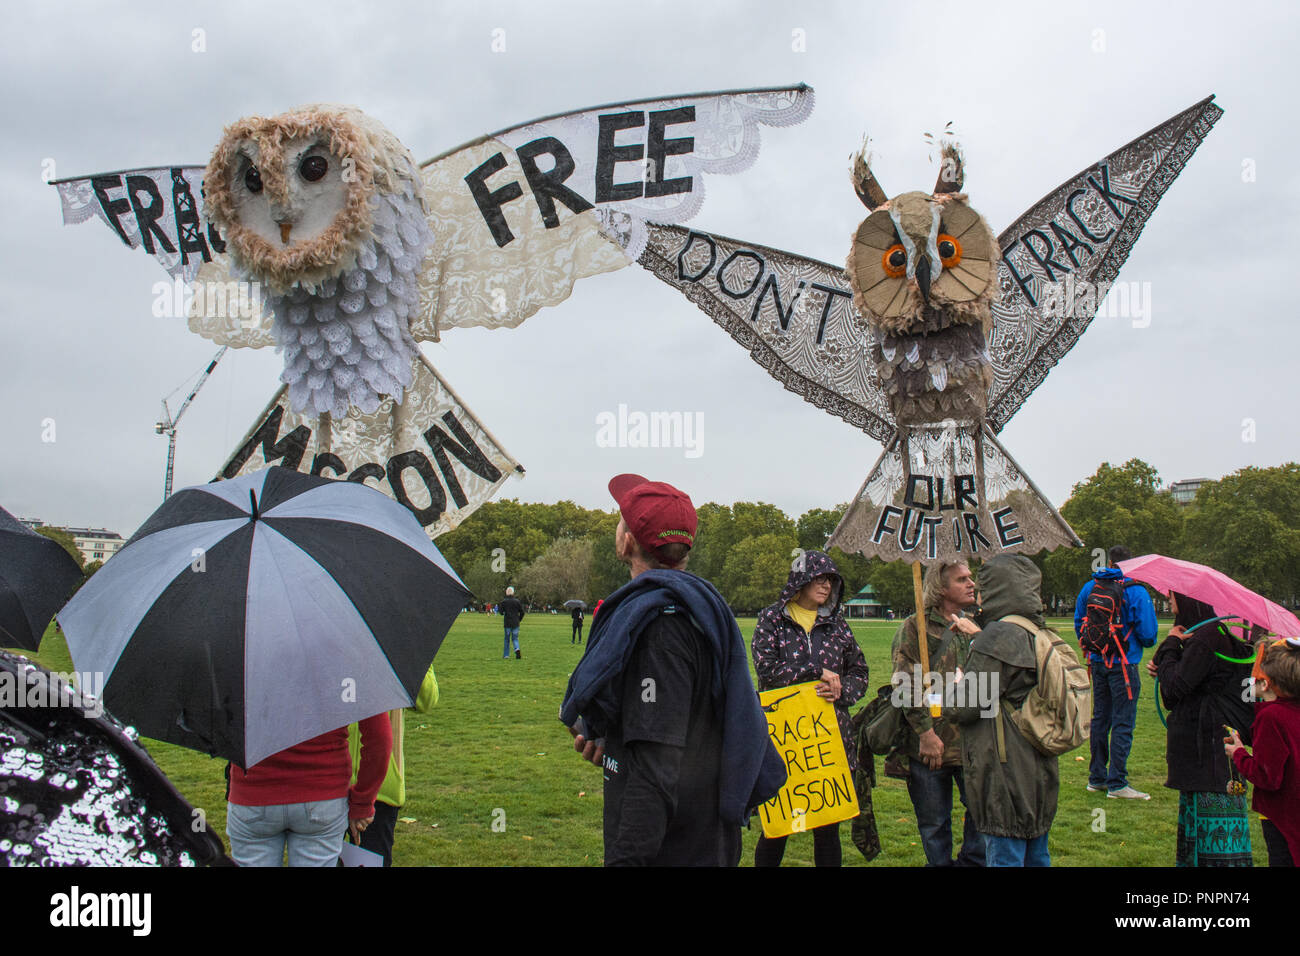 Hyde Park London, UK. 22nd Sept, 2018. Thousands of people who care about wildlife took part in the People's Walk for Wildlife organised by naturalist and broadcaster, Chris Packham. The march to demonstrate support for nature started in Hyde Park, and passed through Picadilly, St. James, Pall Mall, Cockspur St, and Whitehall, finishing at Richmond Terrace. A draft of 'A People's Manifesto for Wildlife', which was published this week and contains 200 ideas to protect wildlife, will be presented to Downing Street. Stock Photo